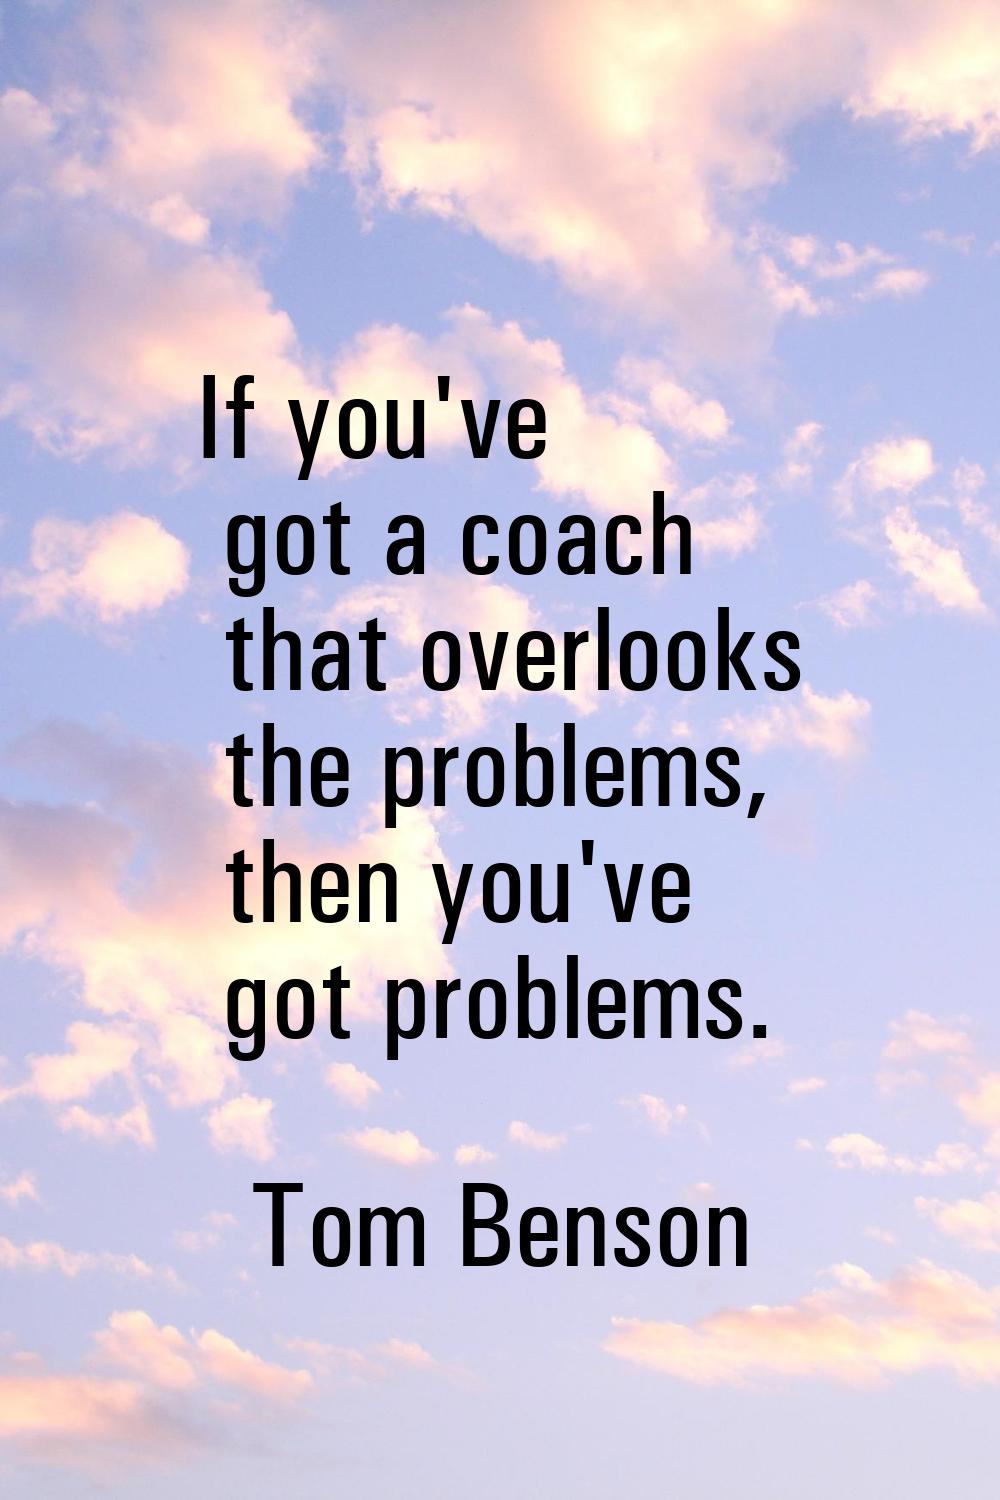 If you've got a coach that overlooks the problems, then you've got problems.